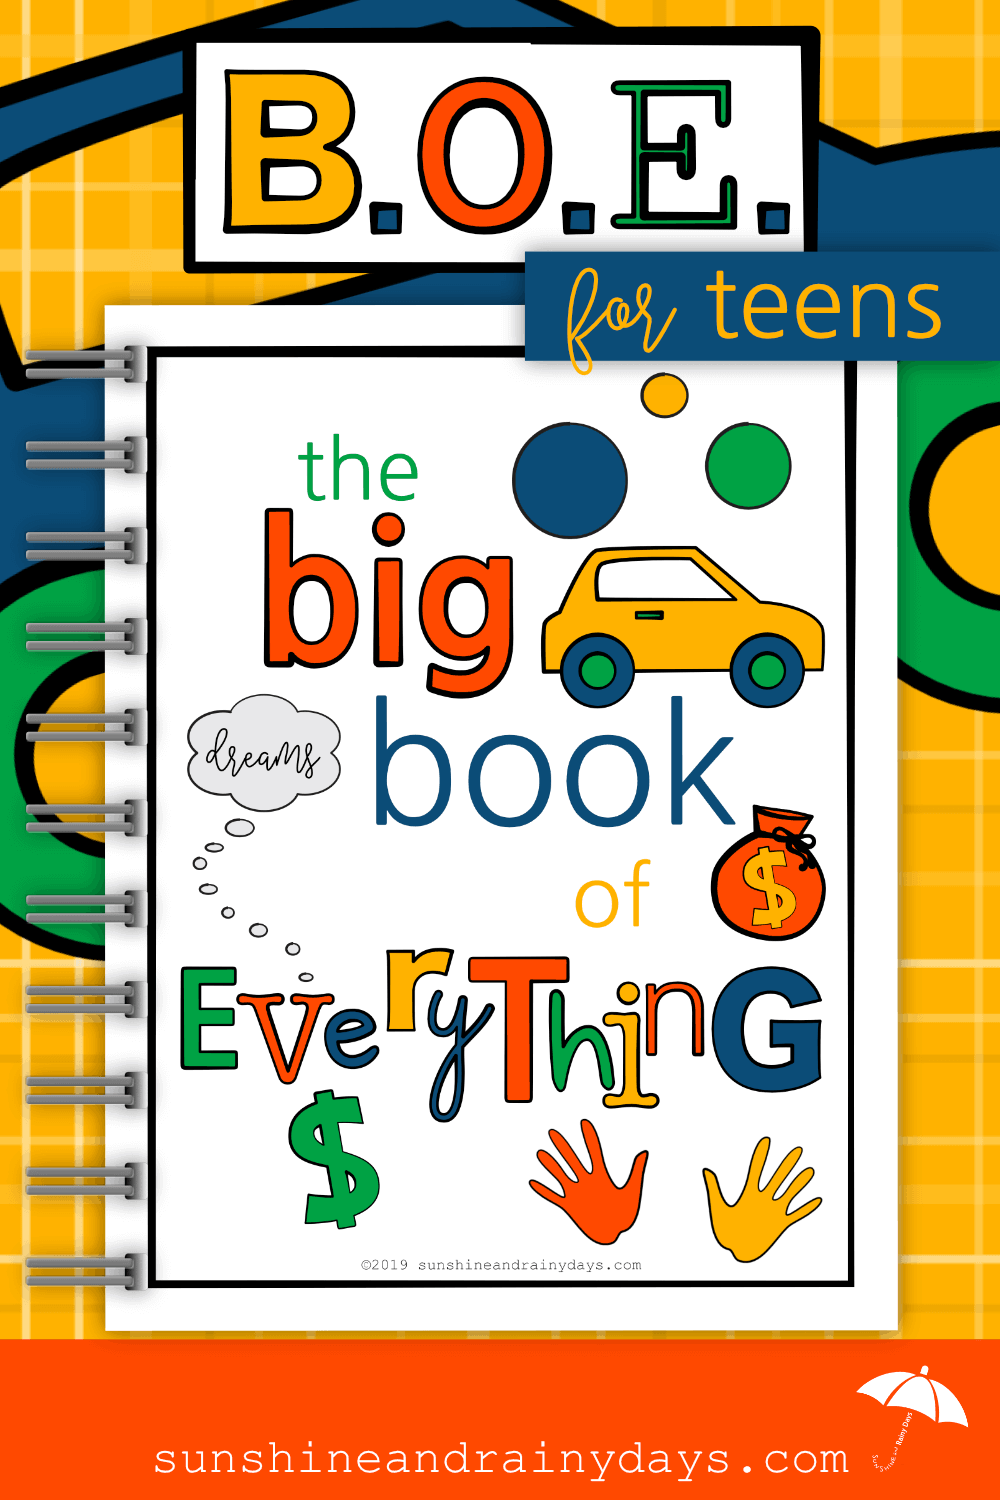 The Big Book of Everything for Teens empowers your teenagers with the information they need at their fingertips! #teenagers